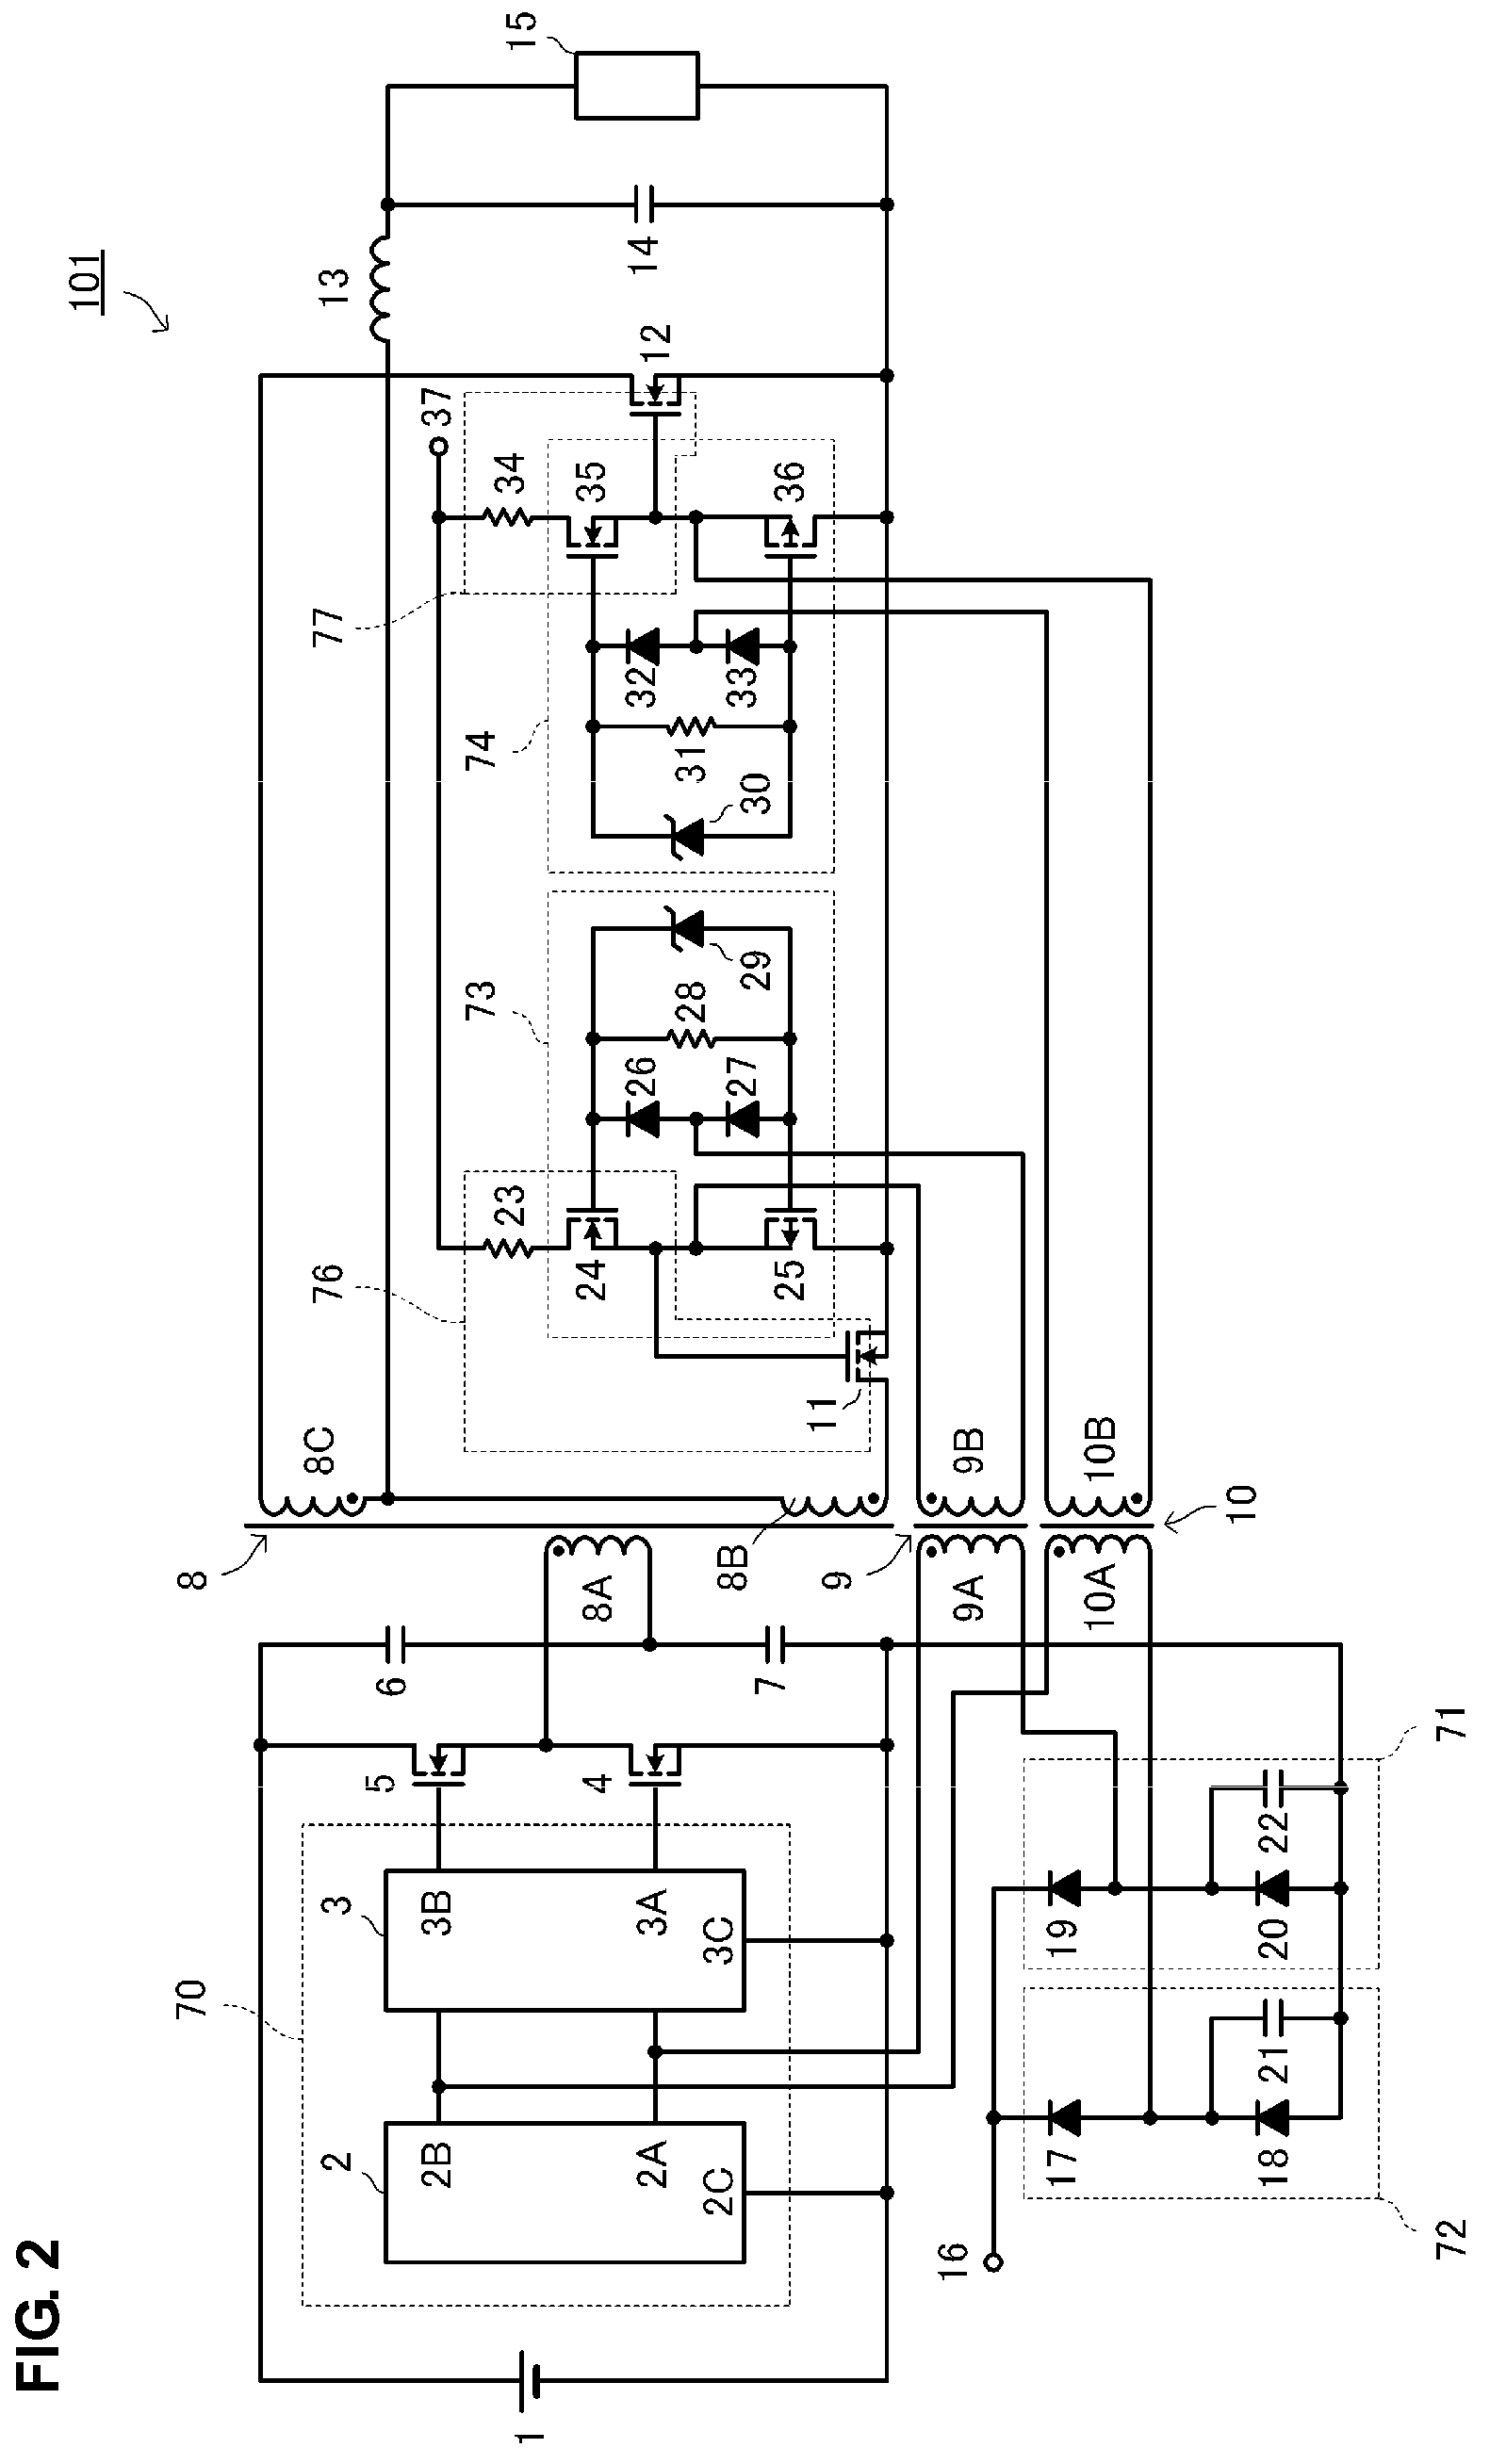 Double-ended isolated DC-DC converter